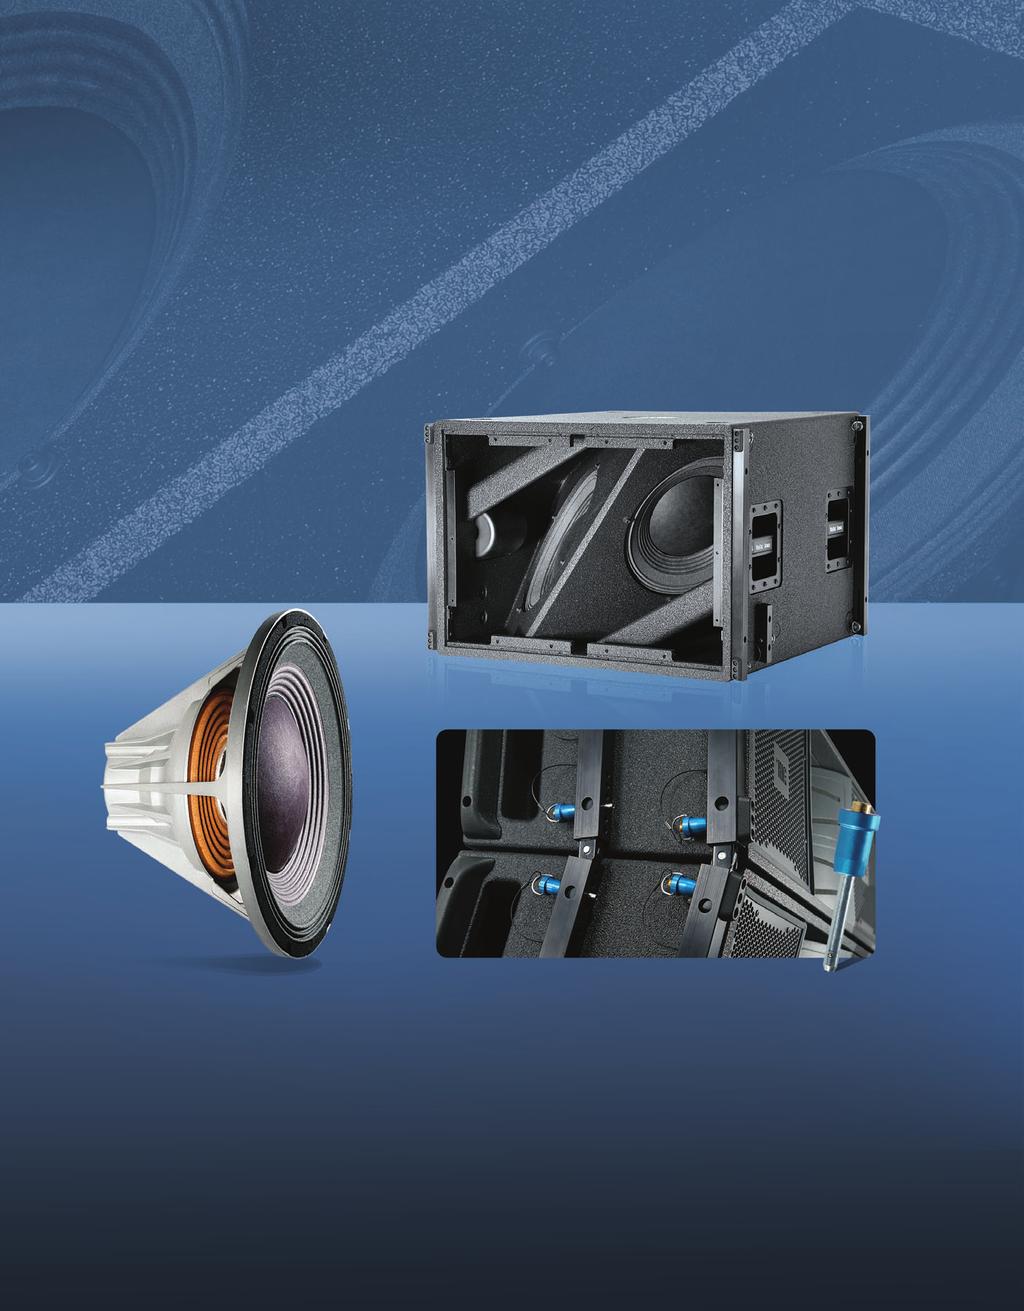 CARDIOID-ARRAYABLE SUBWOOFER The VT4883 can be readily integrated into arrays of full-range VT4886 line array elements.